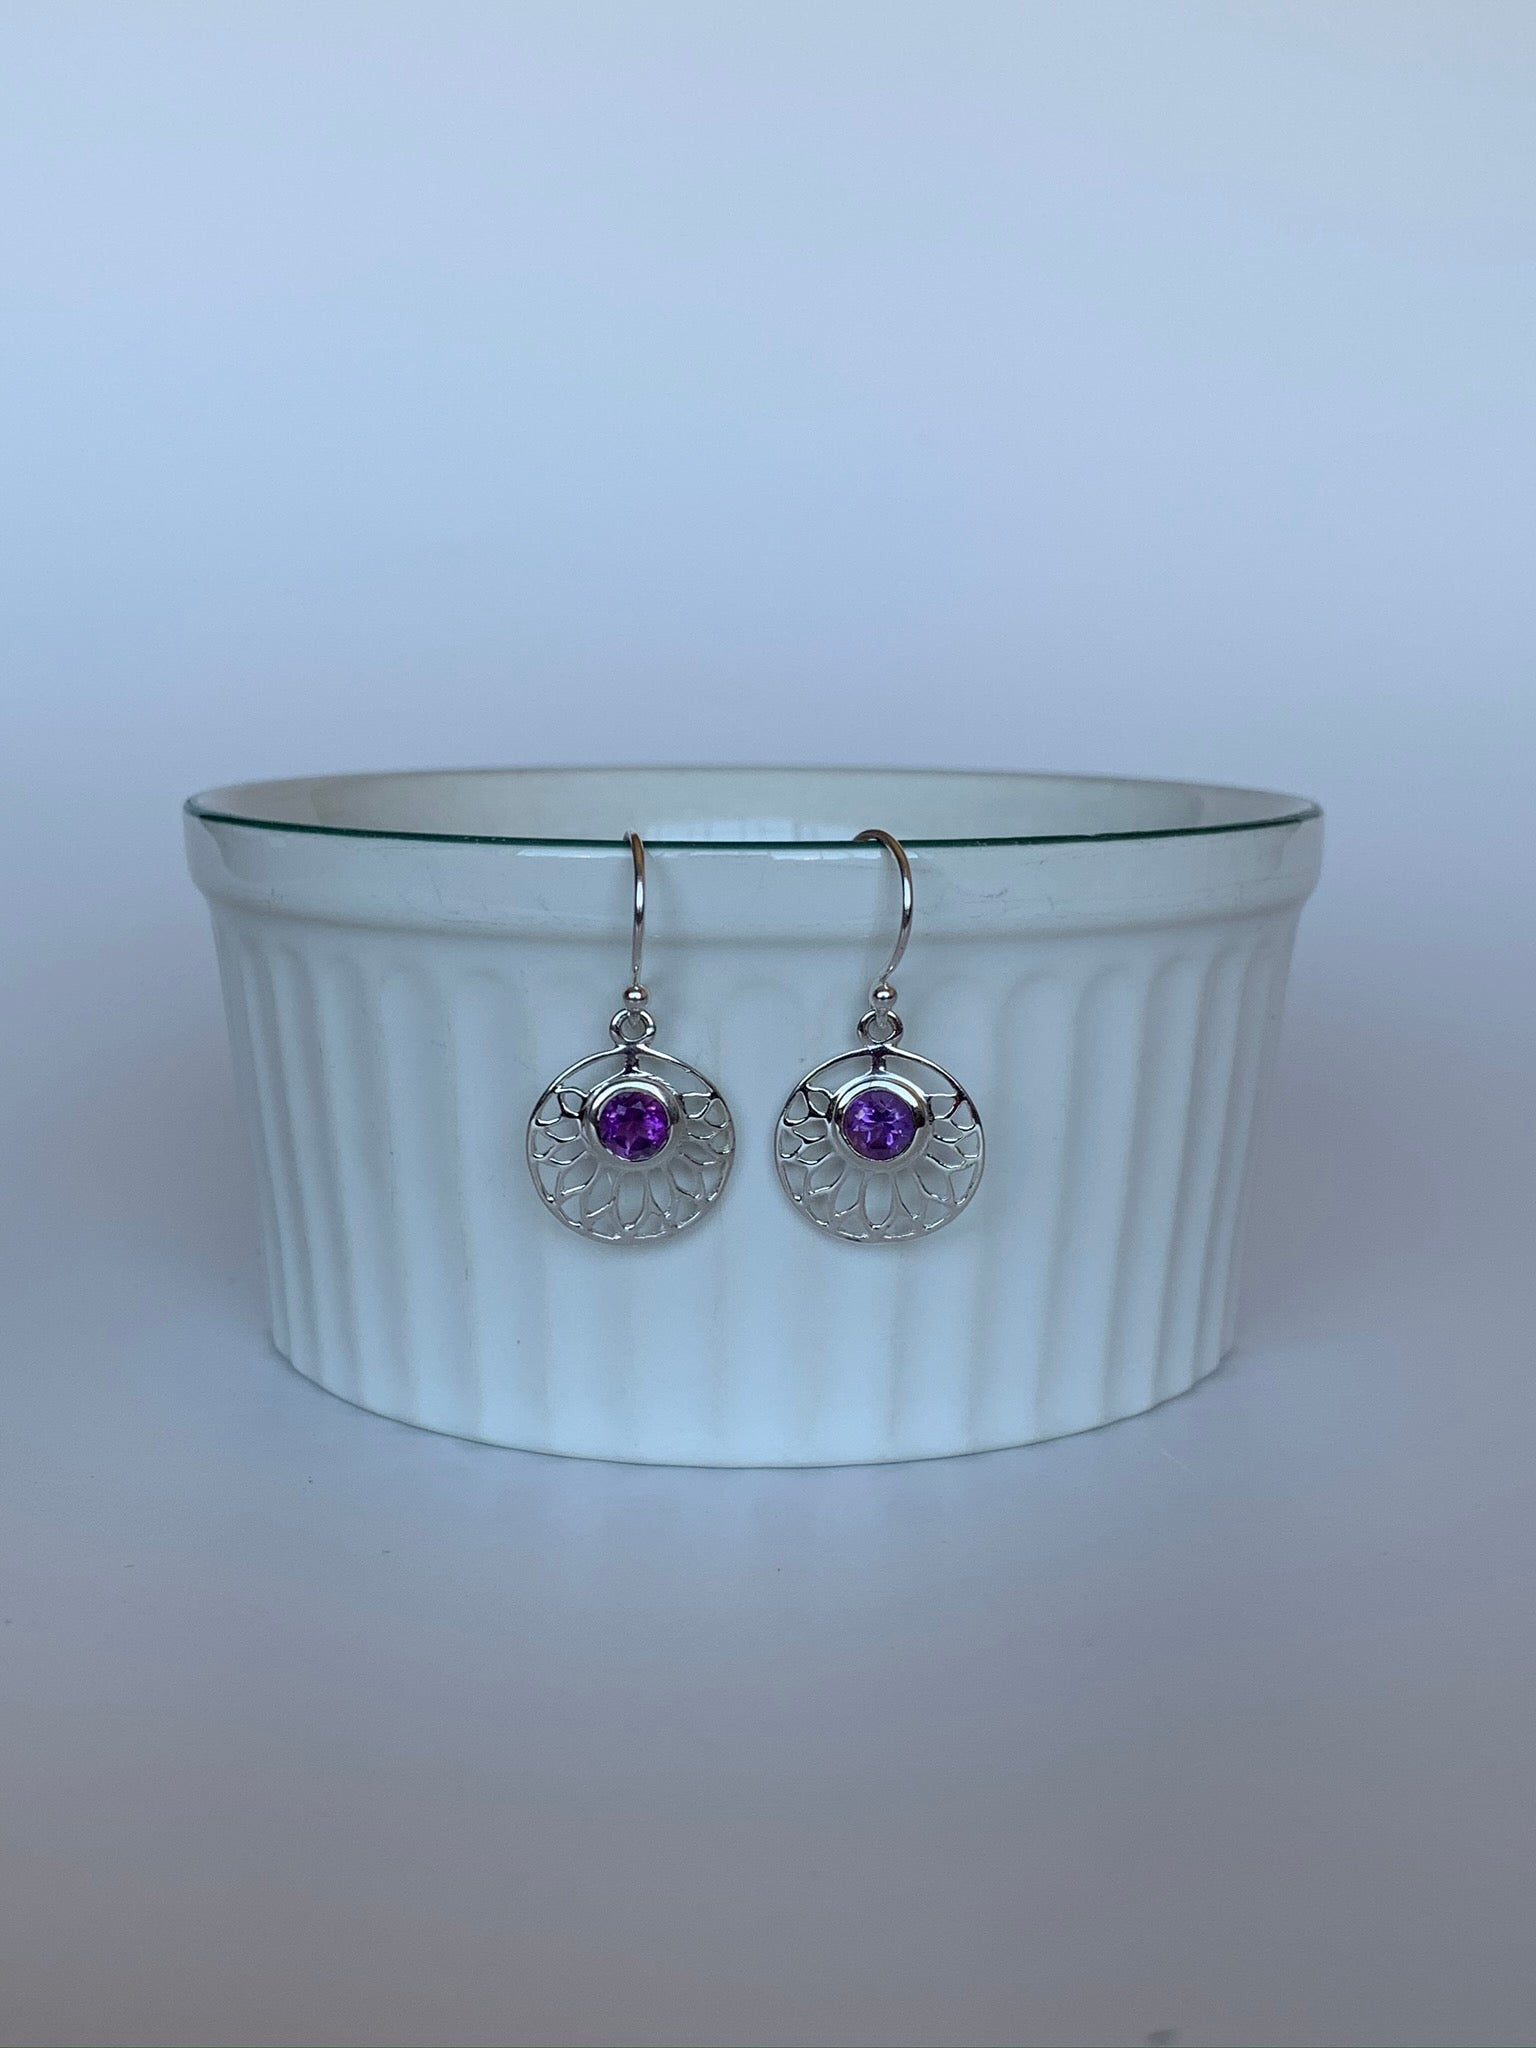 Round amethyst gemstones are set into a delicate, open, sterling silver lotus pattern.  These earrings are lightweight, have wires, not posts and are approximately 1½" long.